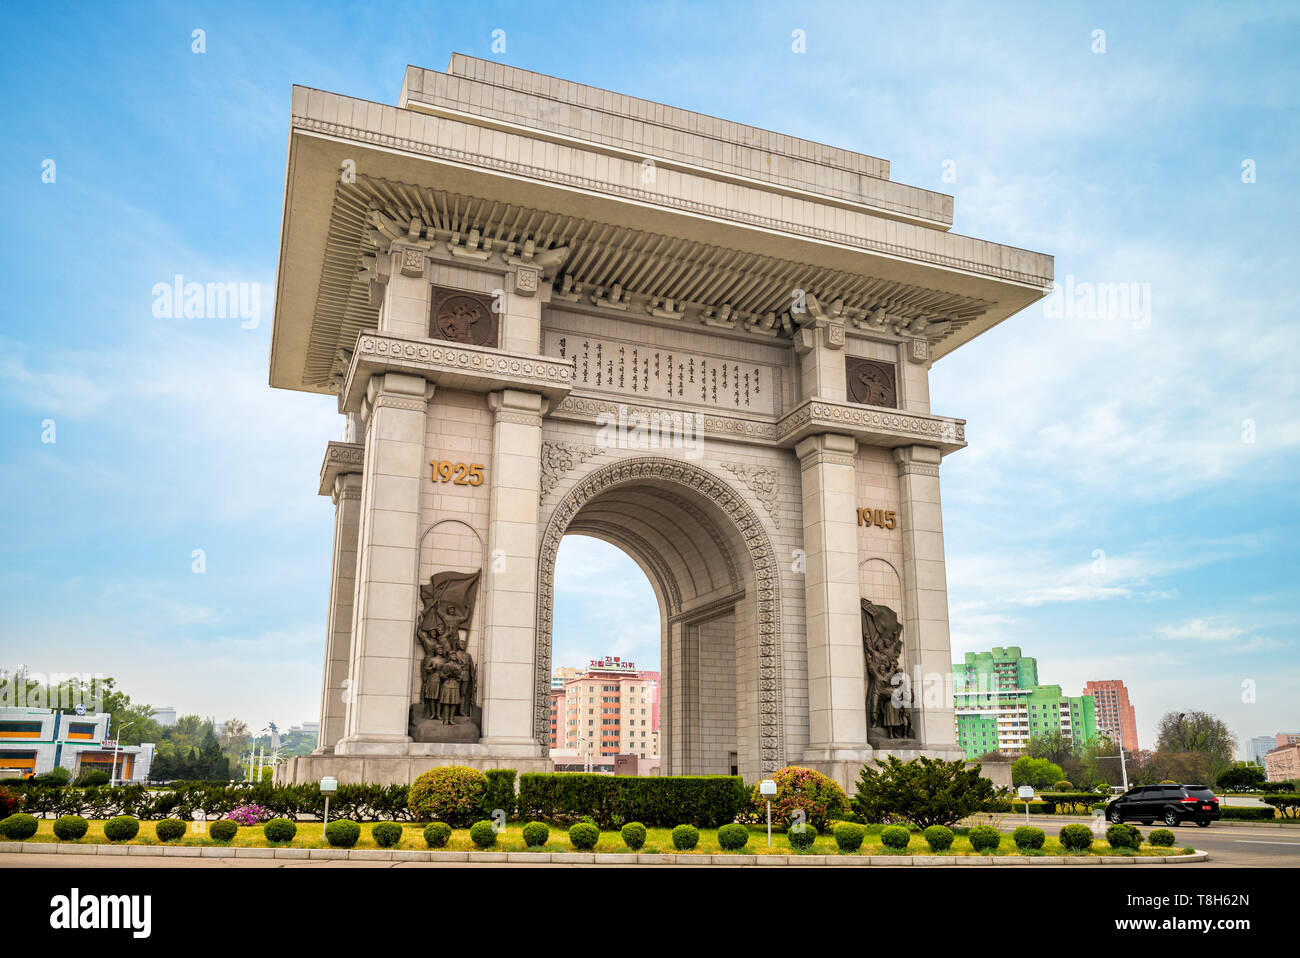 Pyongyang, North Korea - April 29, 2019: Arch of Triumph, a triumphal arch built to commemorate the korean resistance to japan from 1925 to 1945. Stock Photo